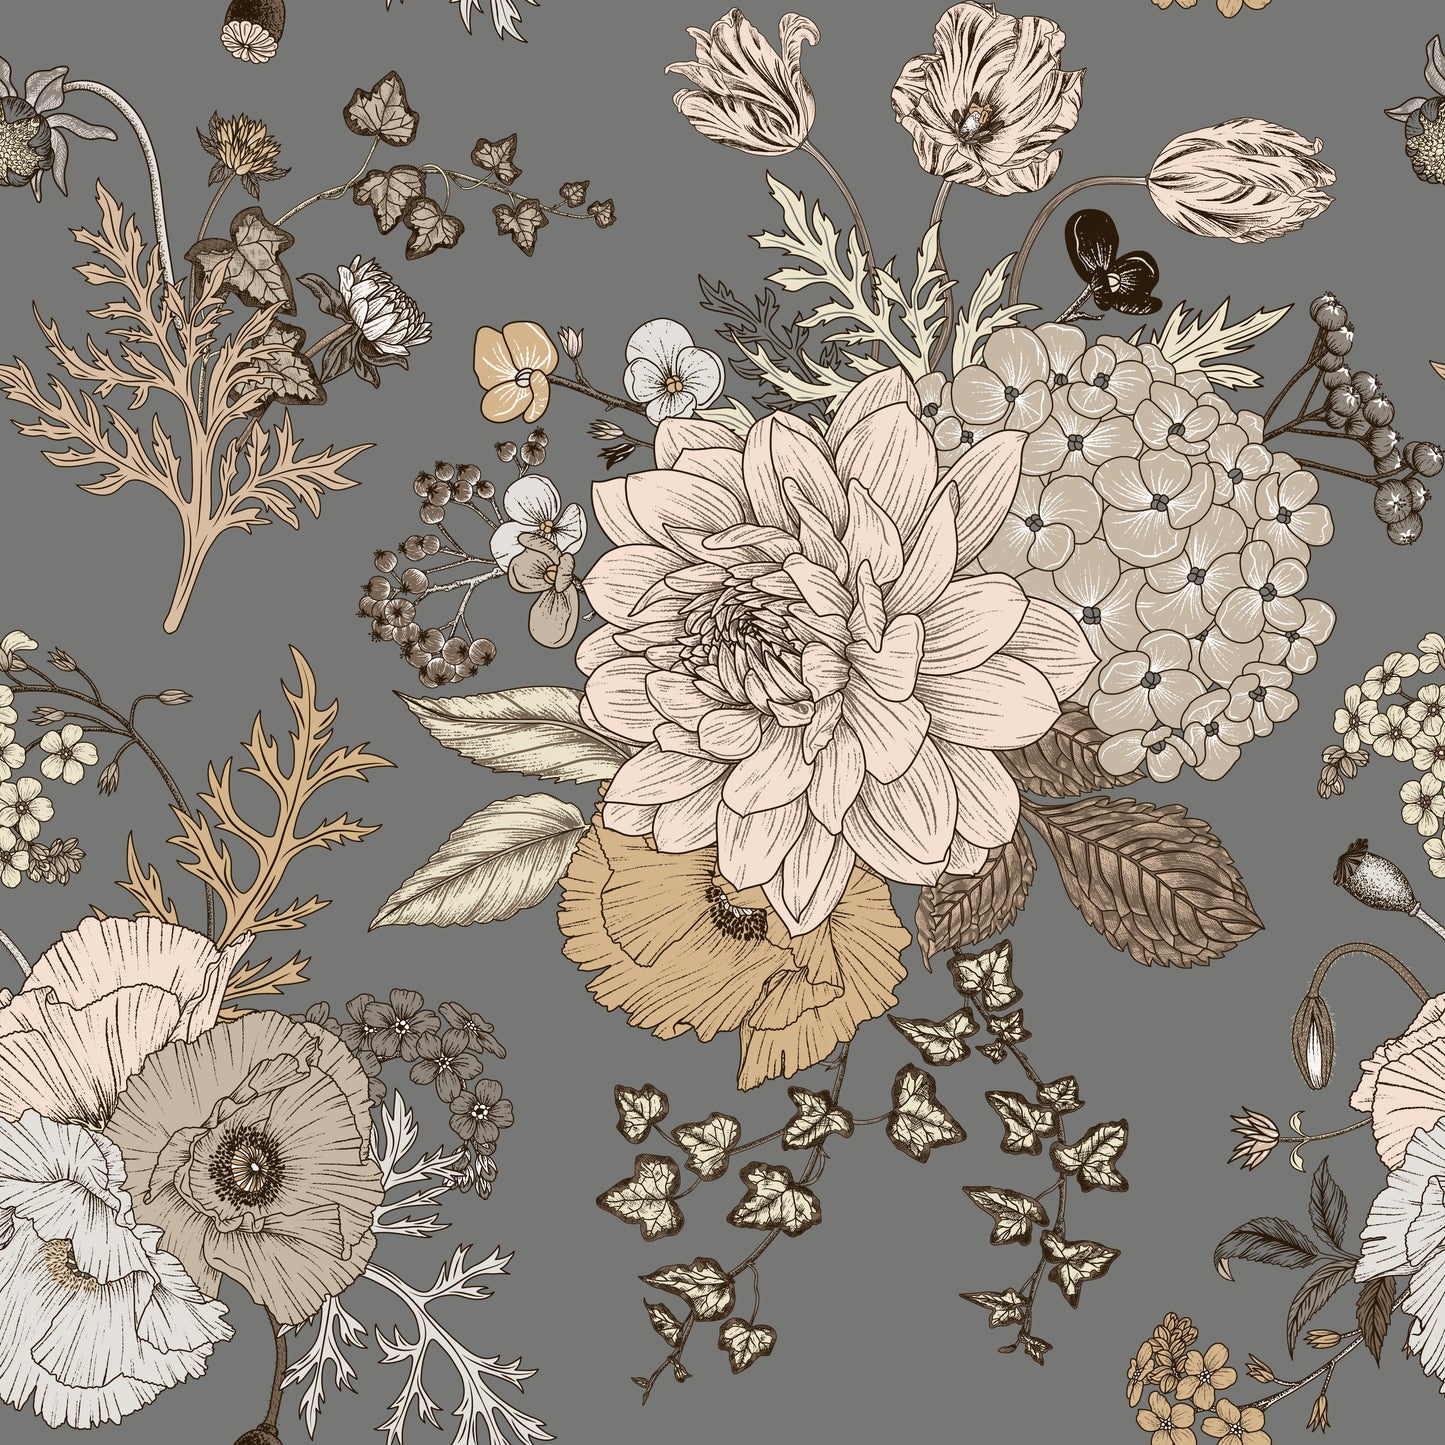 Vintage boho bouquet taupe, brown and cream floral bouquet print on blue grey/gray background easy to install and remove peel and stick custom wallpaper available in different lengths/sizes locally created and printed in Canada wallpaper. Washable, durable, commercial grade, removable and waterproof.